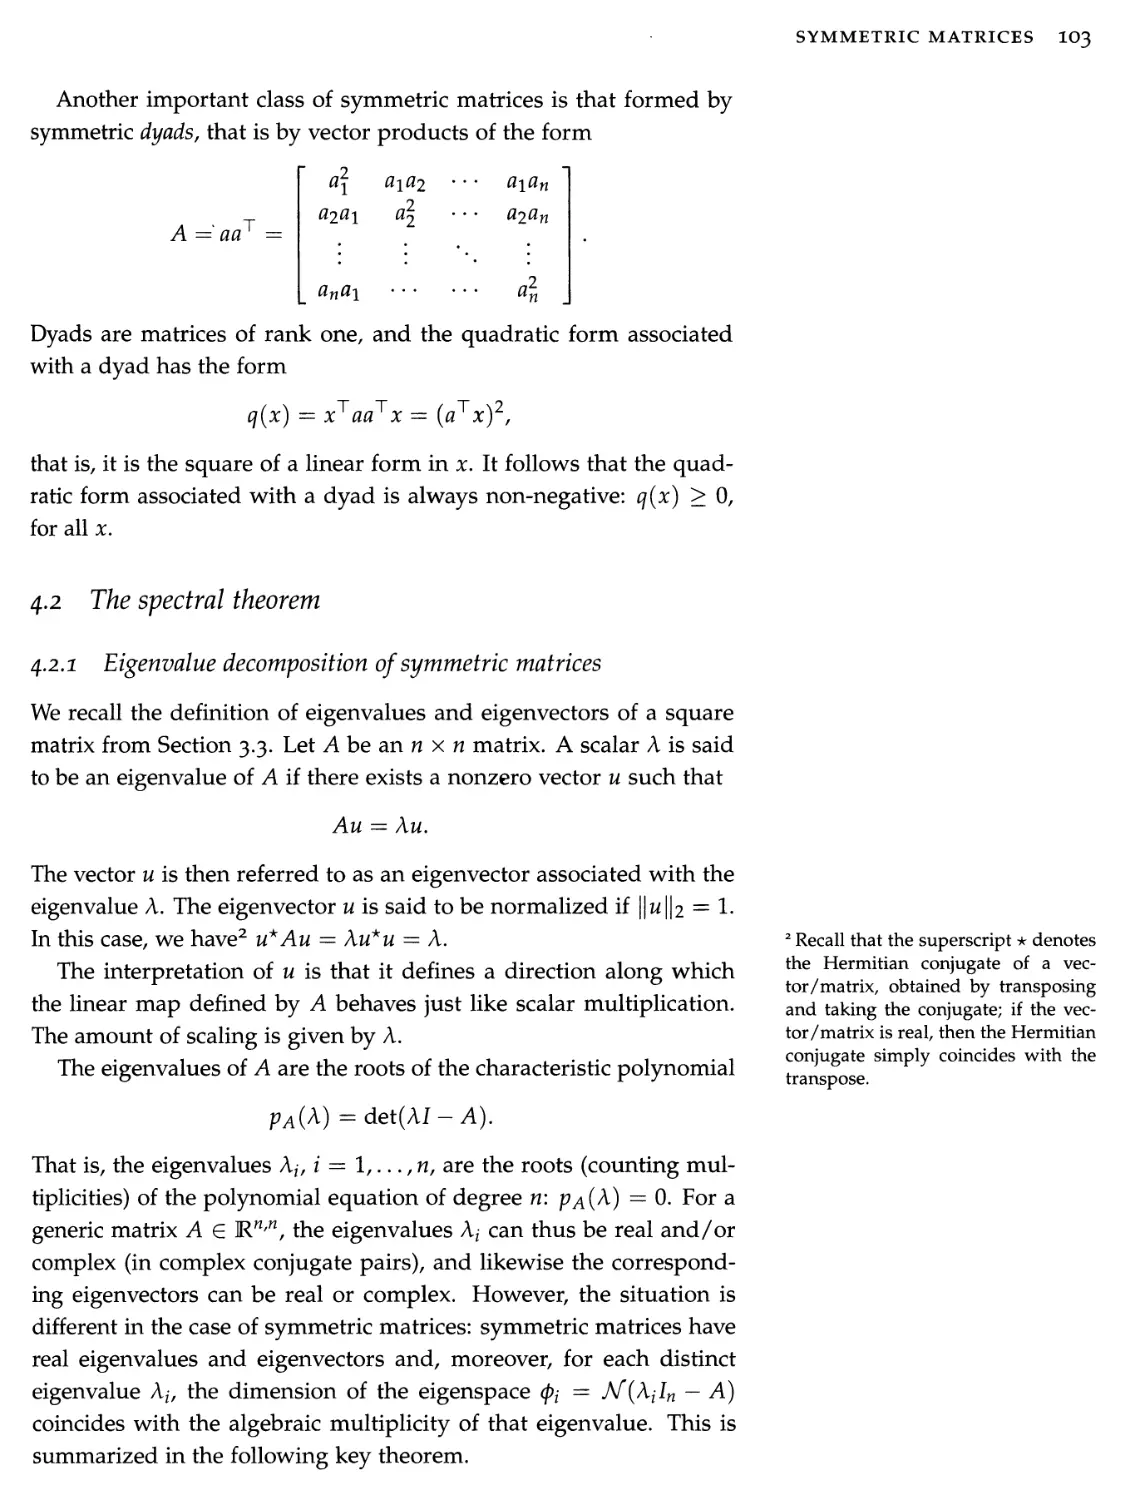 4.2 The spectral theorem 103